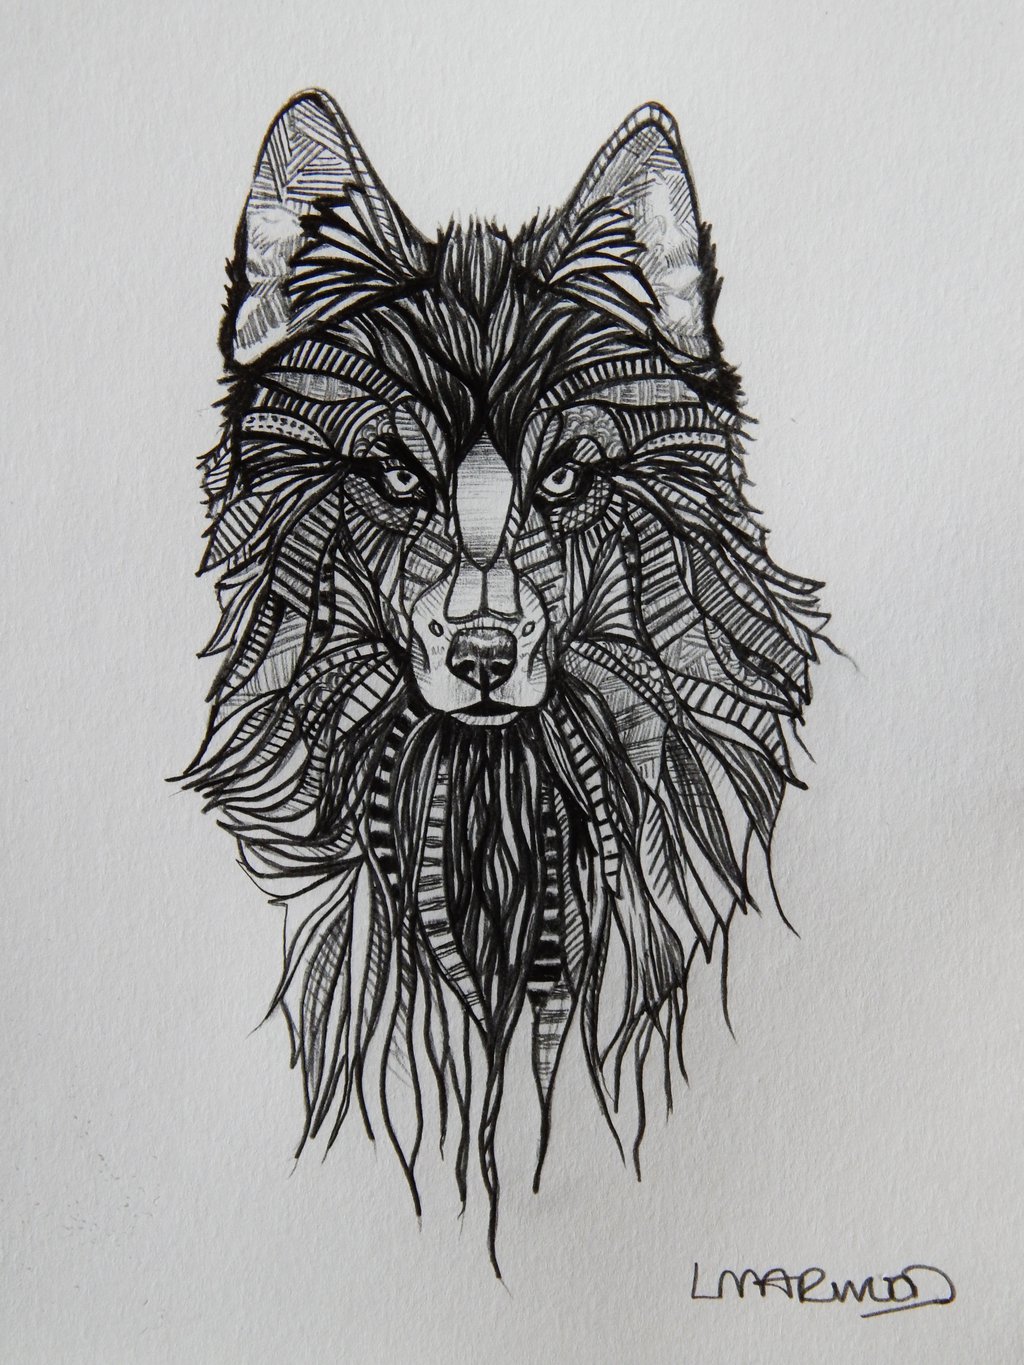 Awesome black-color wolf portrait tattoo design by Lauren Marwood